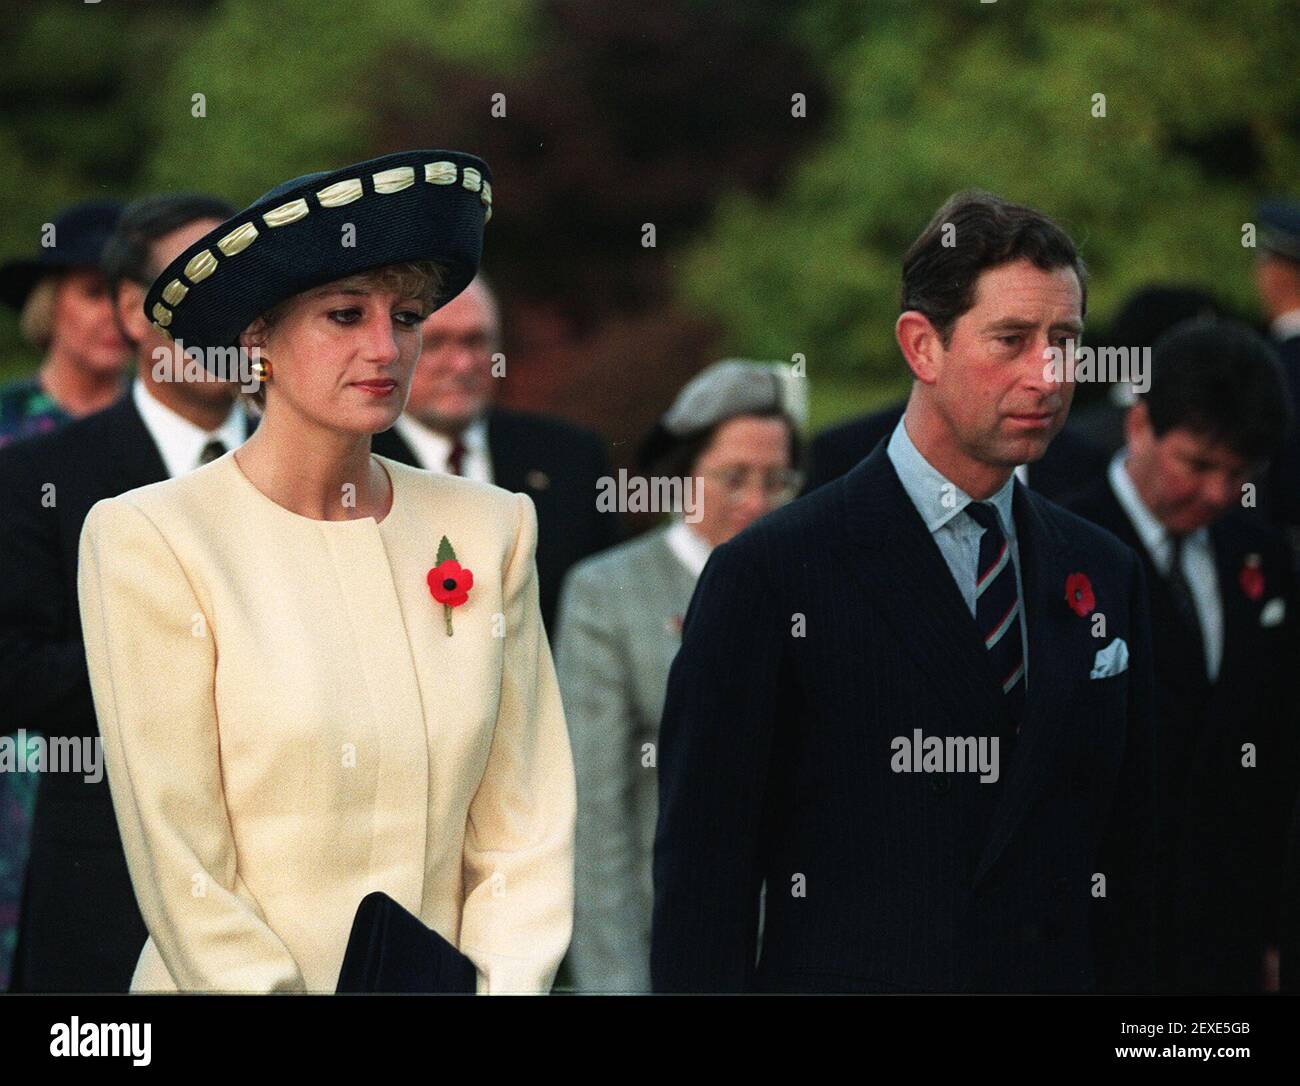 File photo dated 02/11/92 of the Prince and Princess of Wales stand during a visit to the national cemetery in Seoul. As the bitter fallout from Megxit worsens, the monarchy's troubles have been labelled the War of the Waleses 2.0. Stock Photo